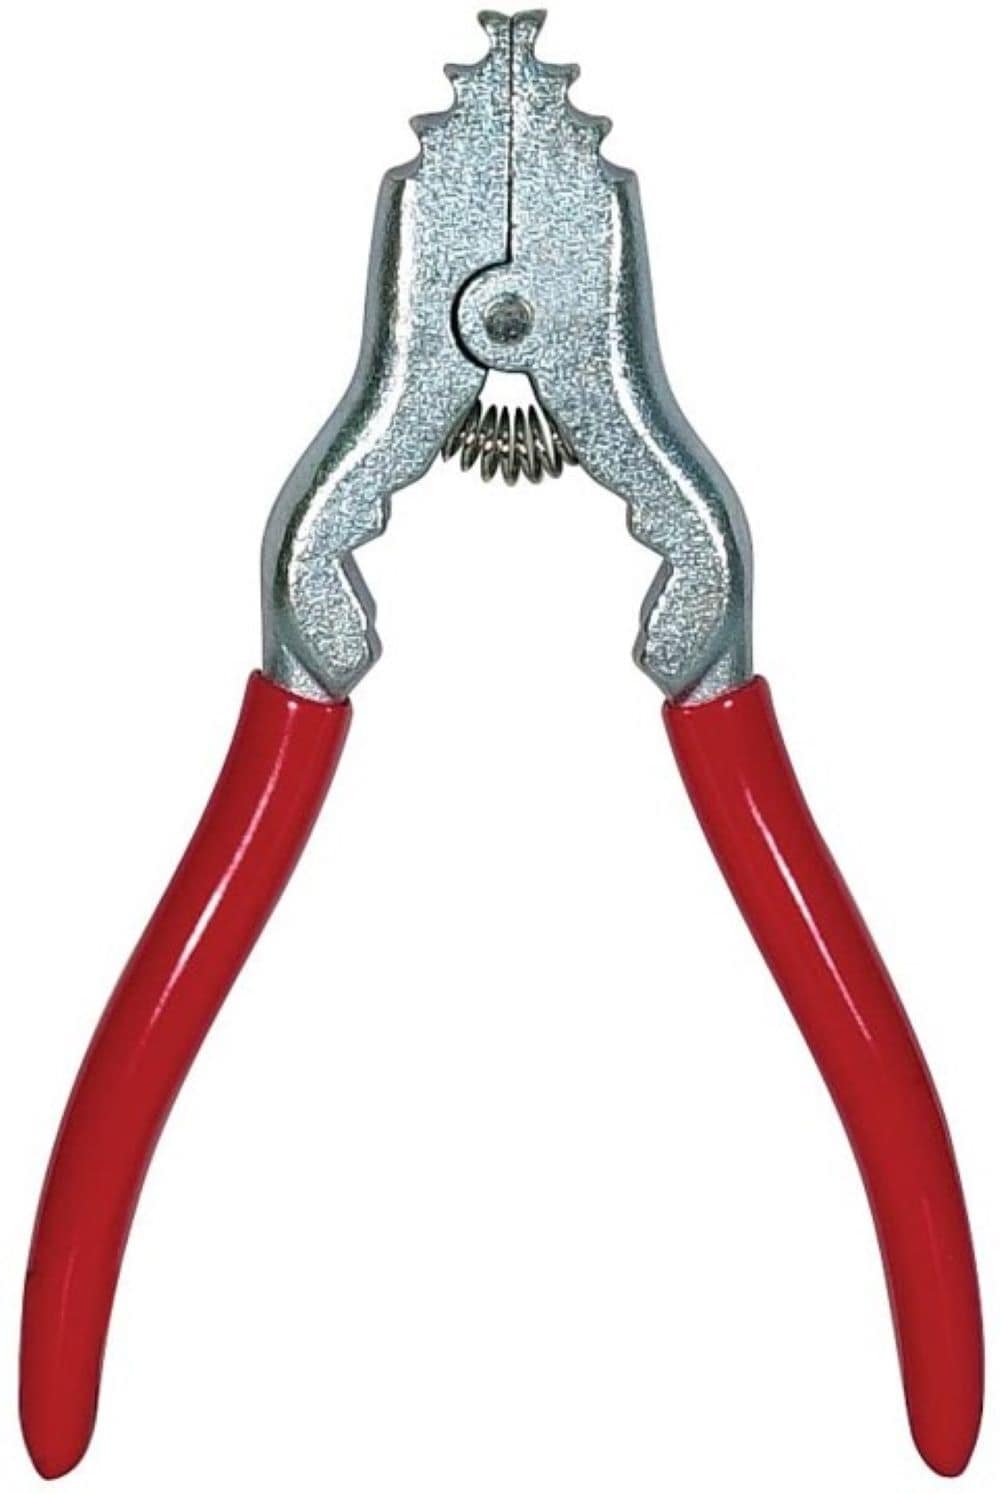 Husky 6 in. and 8 in. Snap Ring Pliers with Cushion Grip (2-Pack) HSRPS68 -  The Home Depot